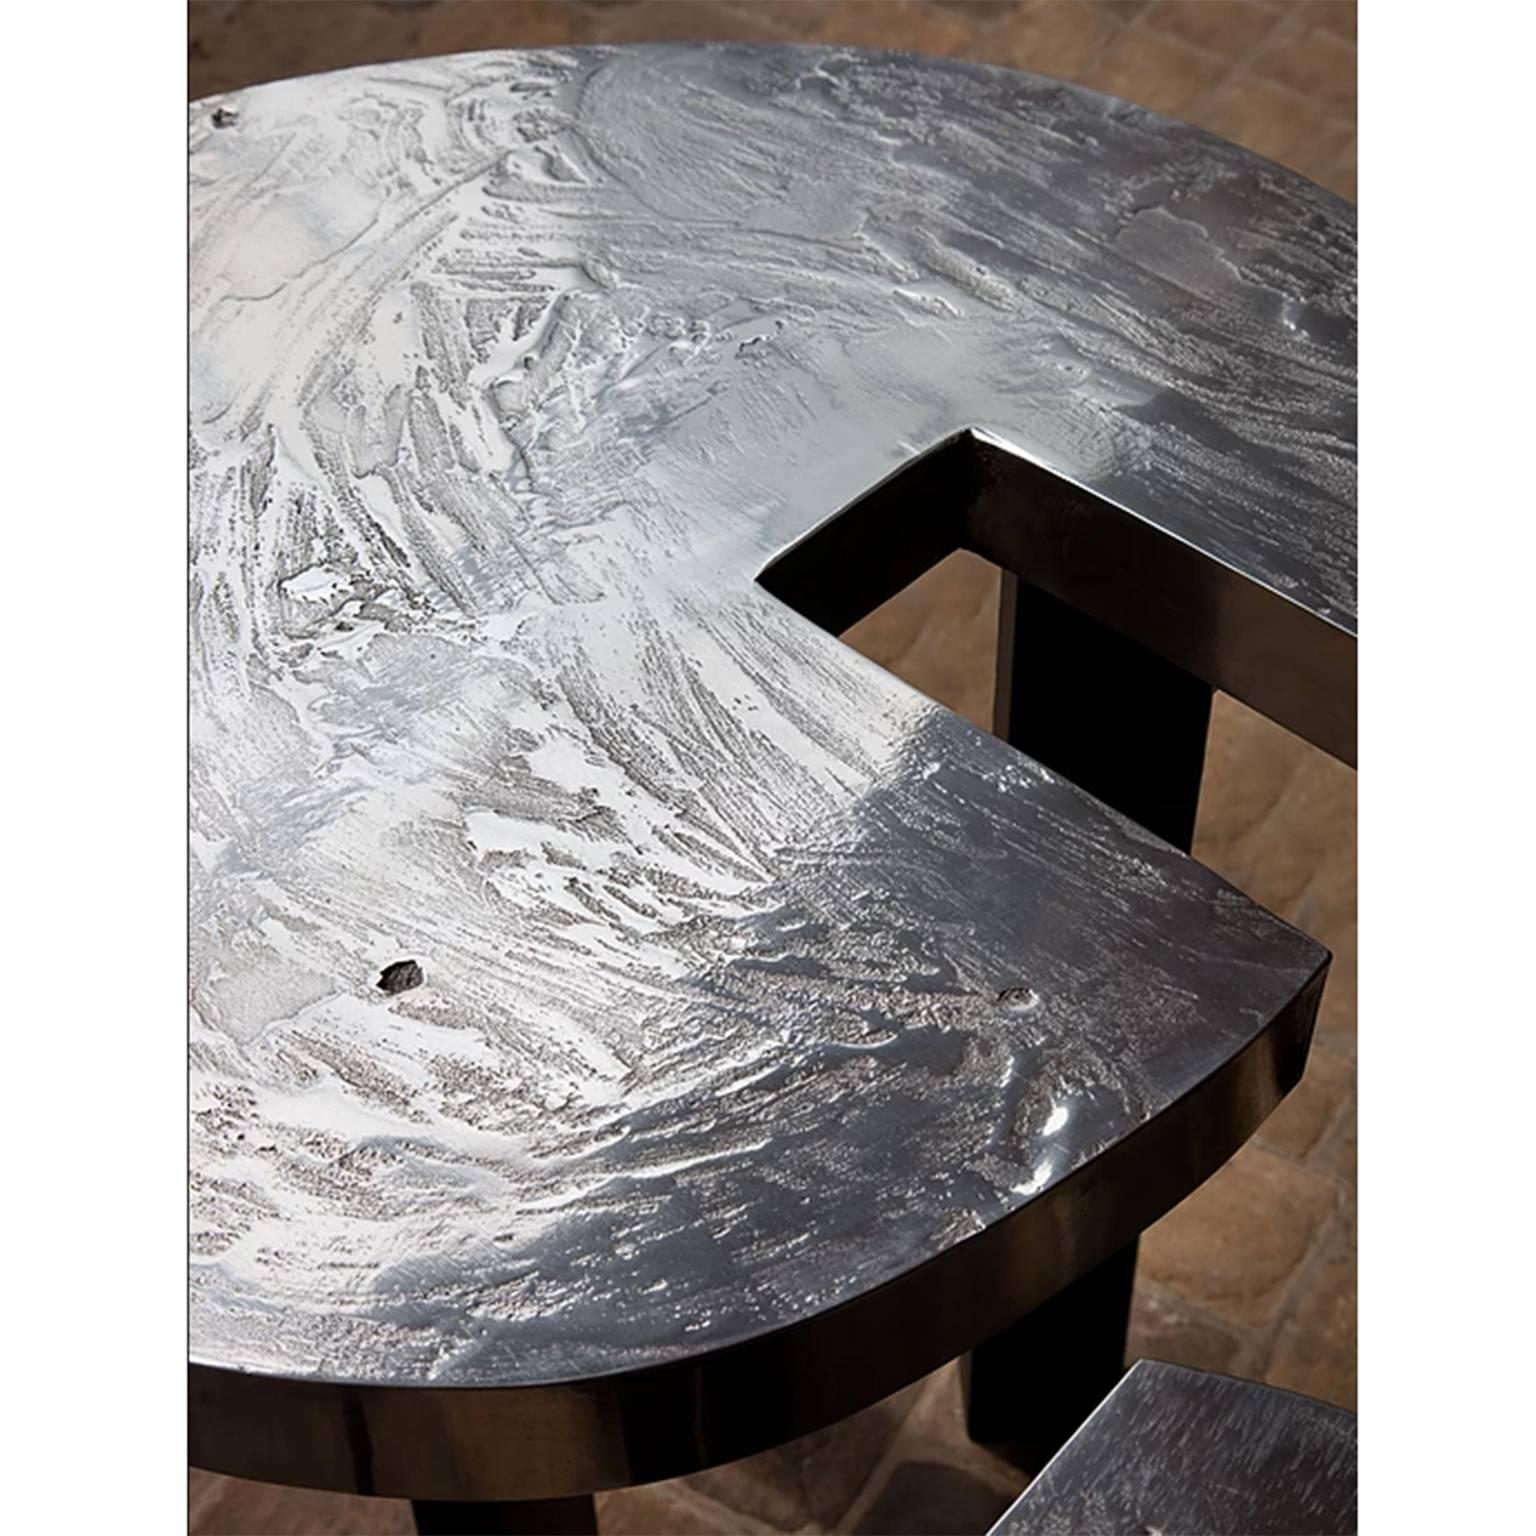 Superb coffee table by Ado Chale.

Composed of four separate tabletop with custom tripod legs.
Surface imprints with irregular moon relief.

From a drawing of 1973, edited in 2013.

Still in production, please note that if not in stock the